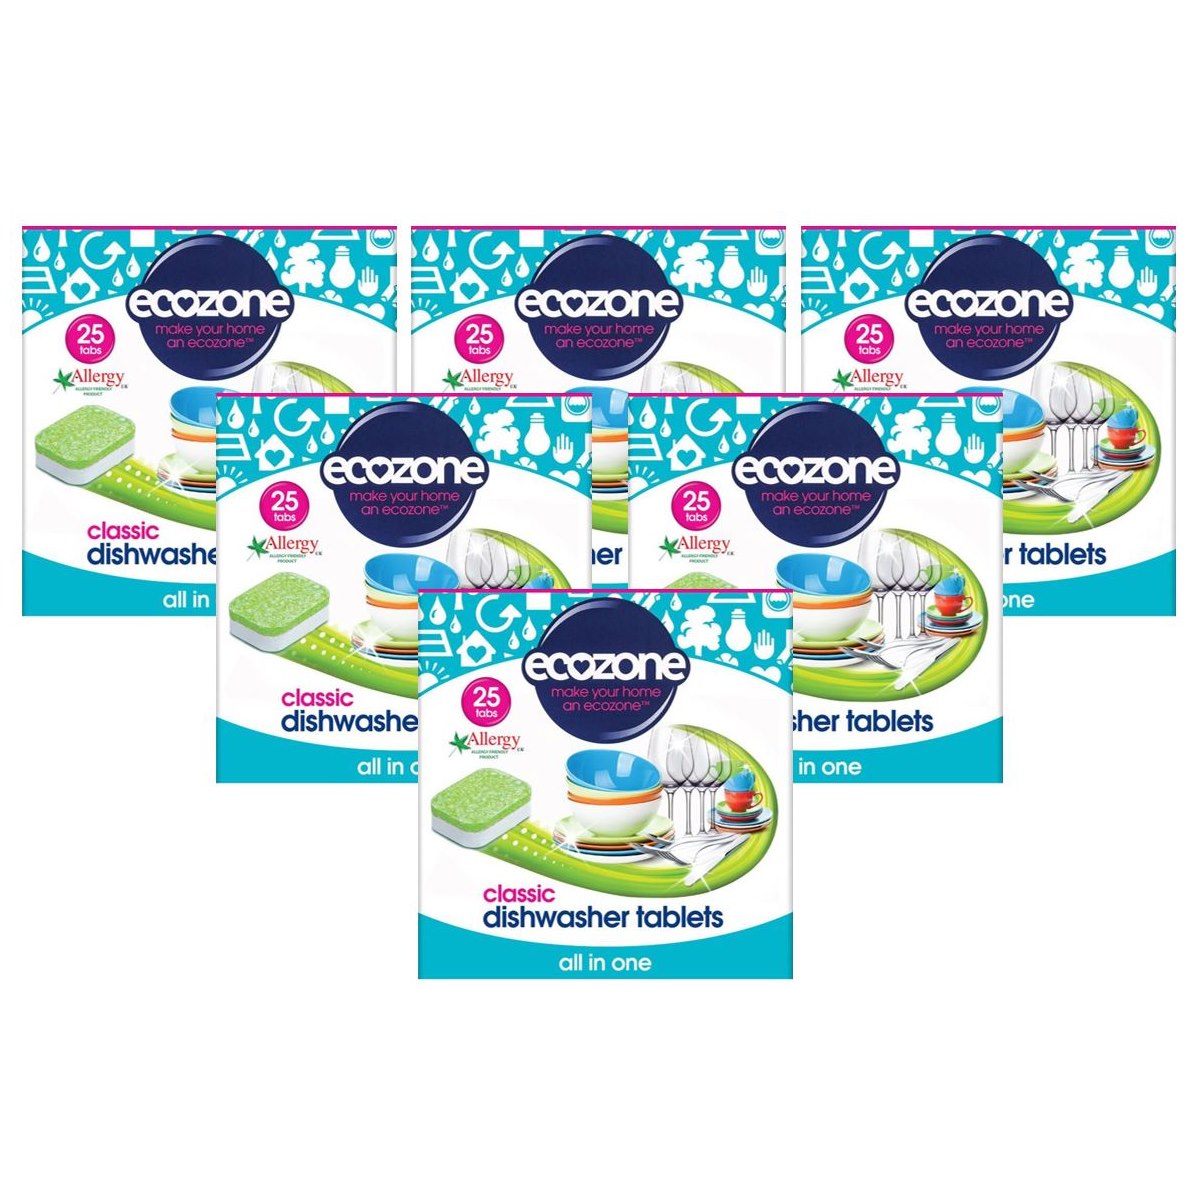 Case of 6 x Ecozone Classic Dishwasher Tablets All in One Pack of 25